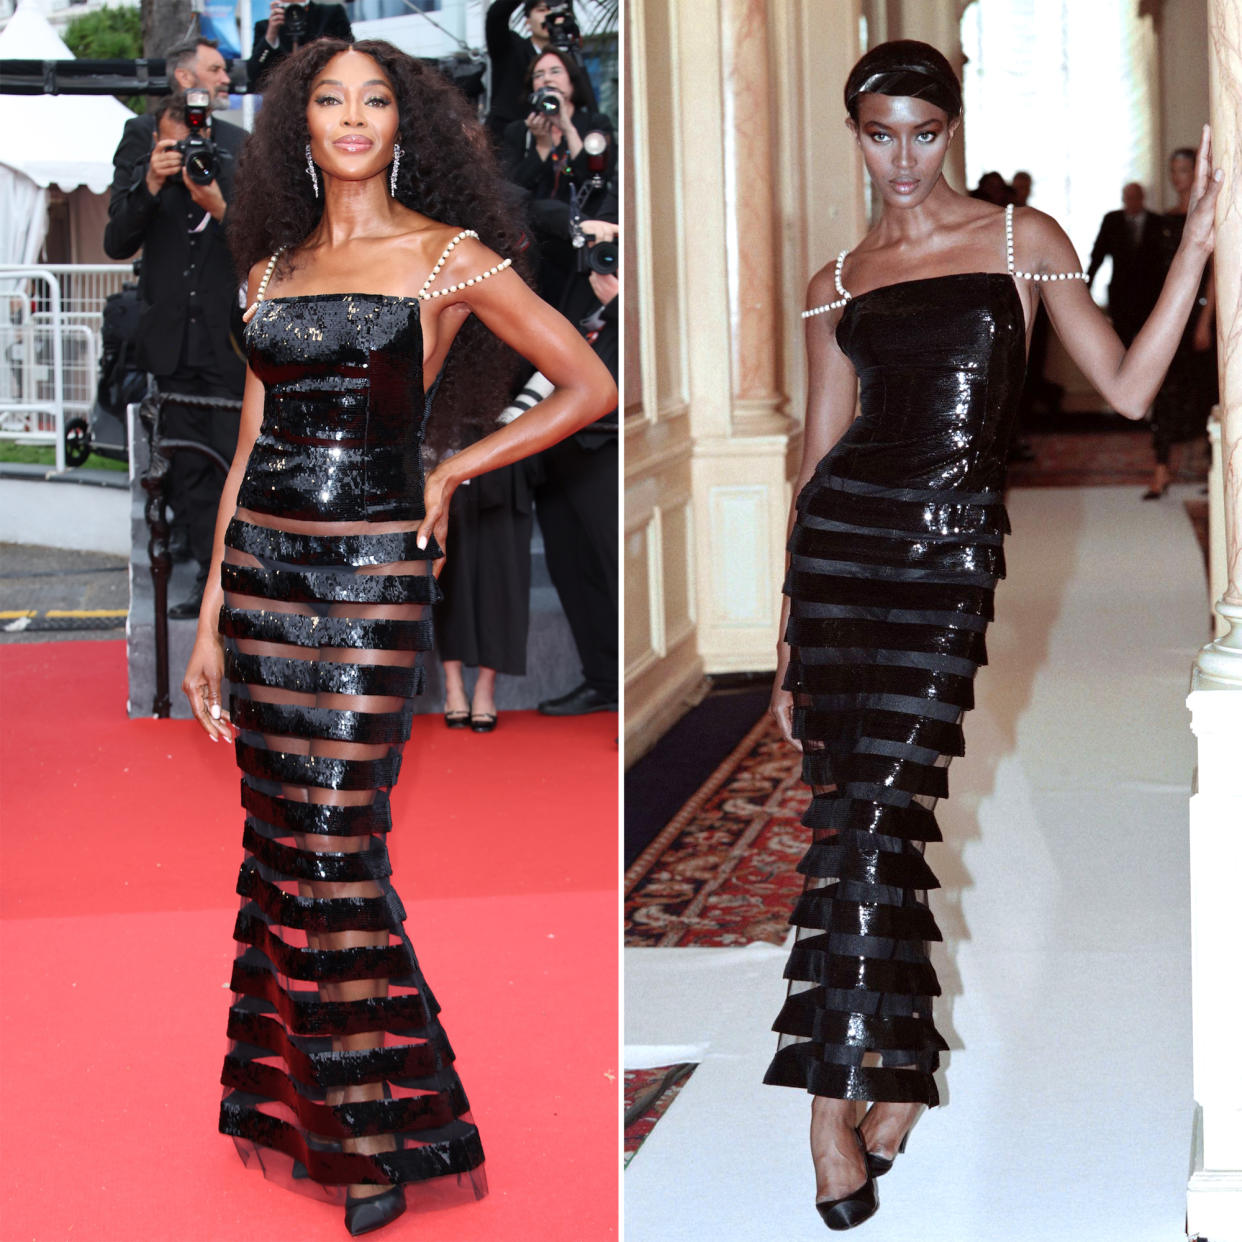 Naomi Campbell Rewears 1996 Dress at Cannes